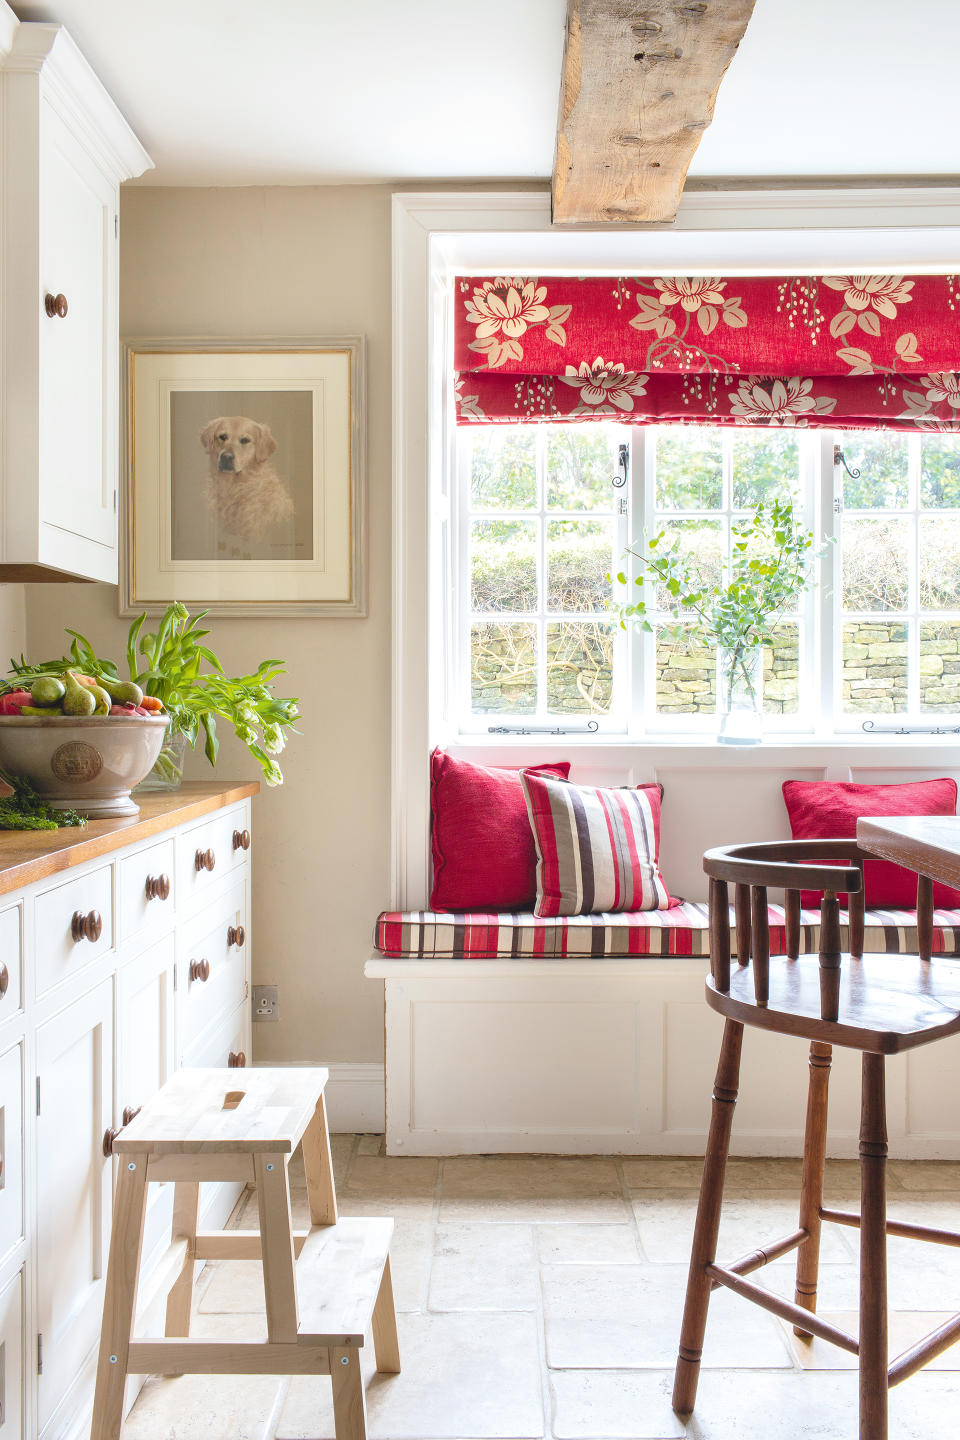 9. Boost kitchen seating with a window seat